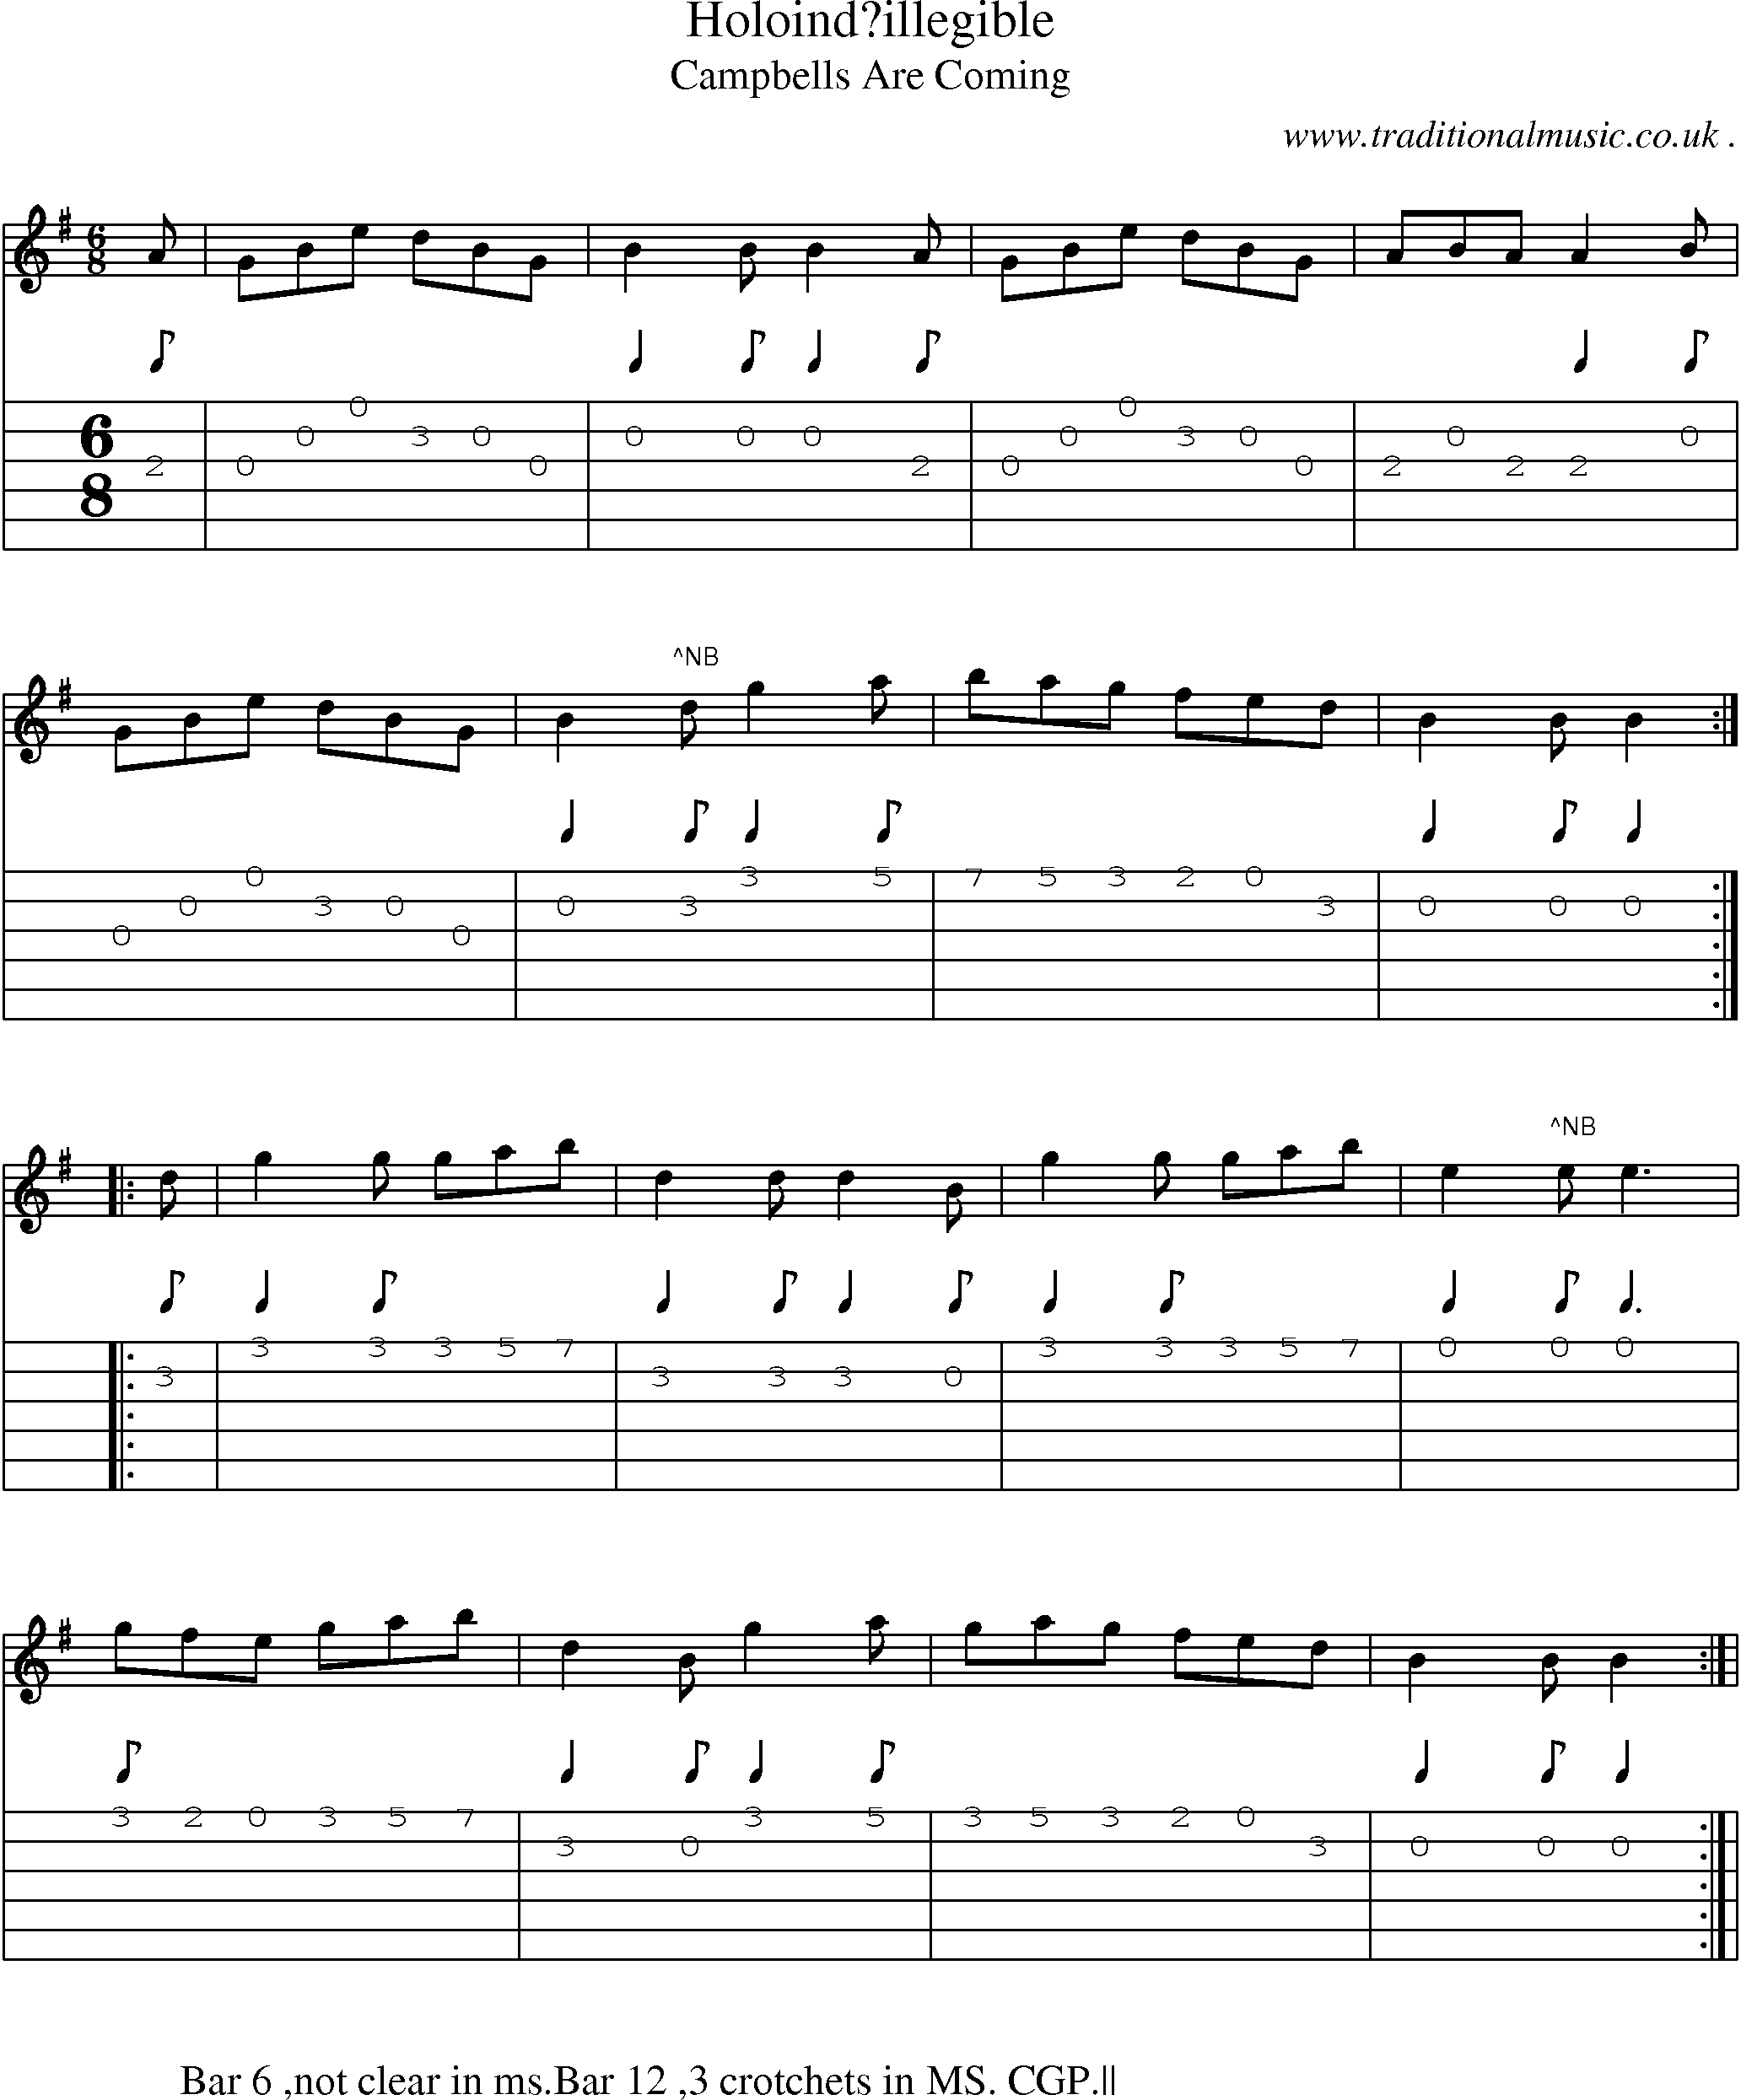 Sheet-Music and Guitar Tabs for Holoindillegible